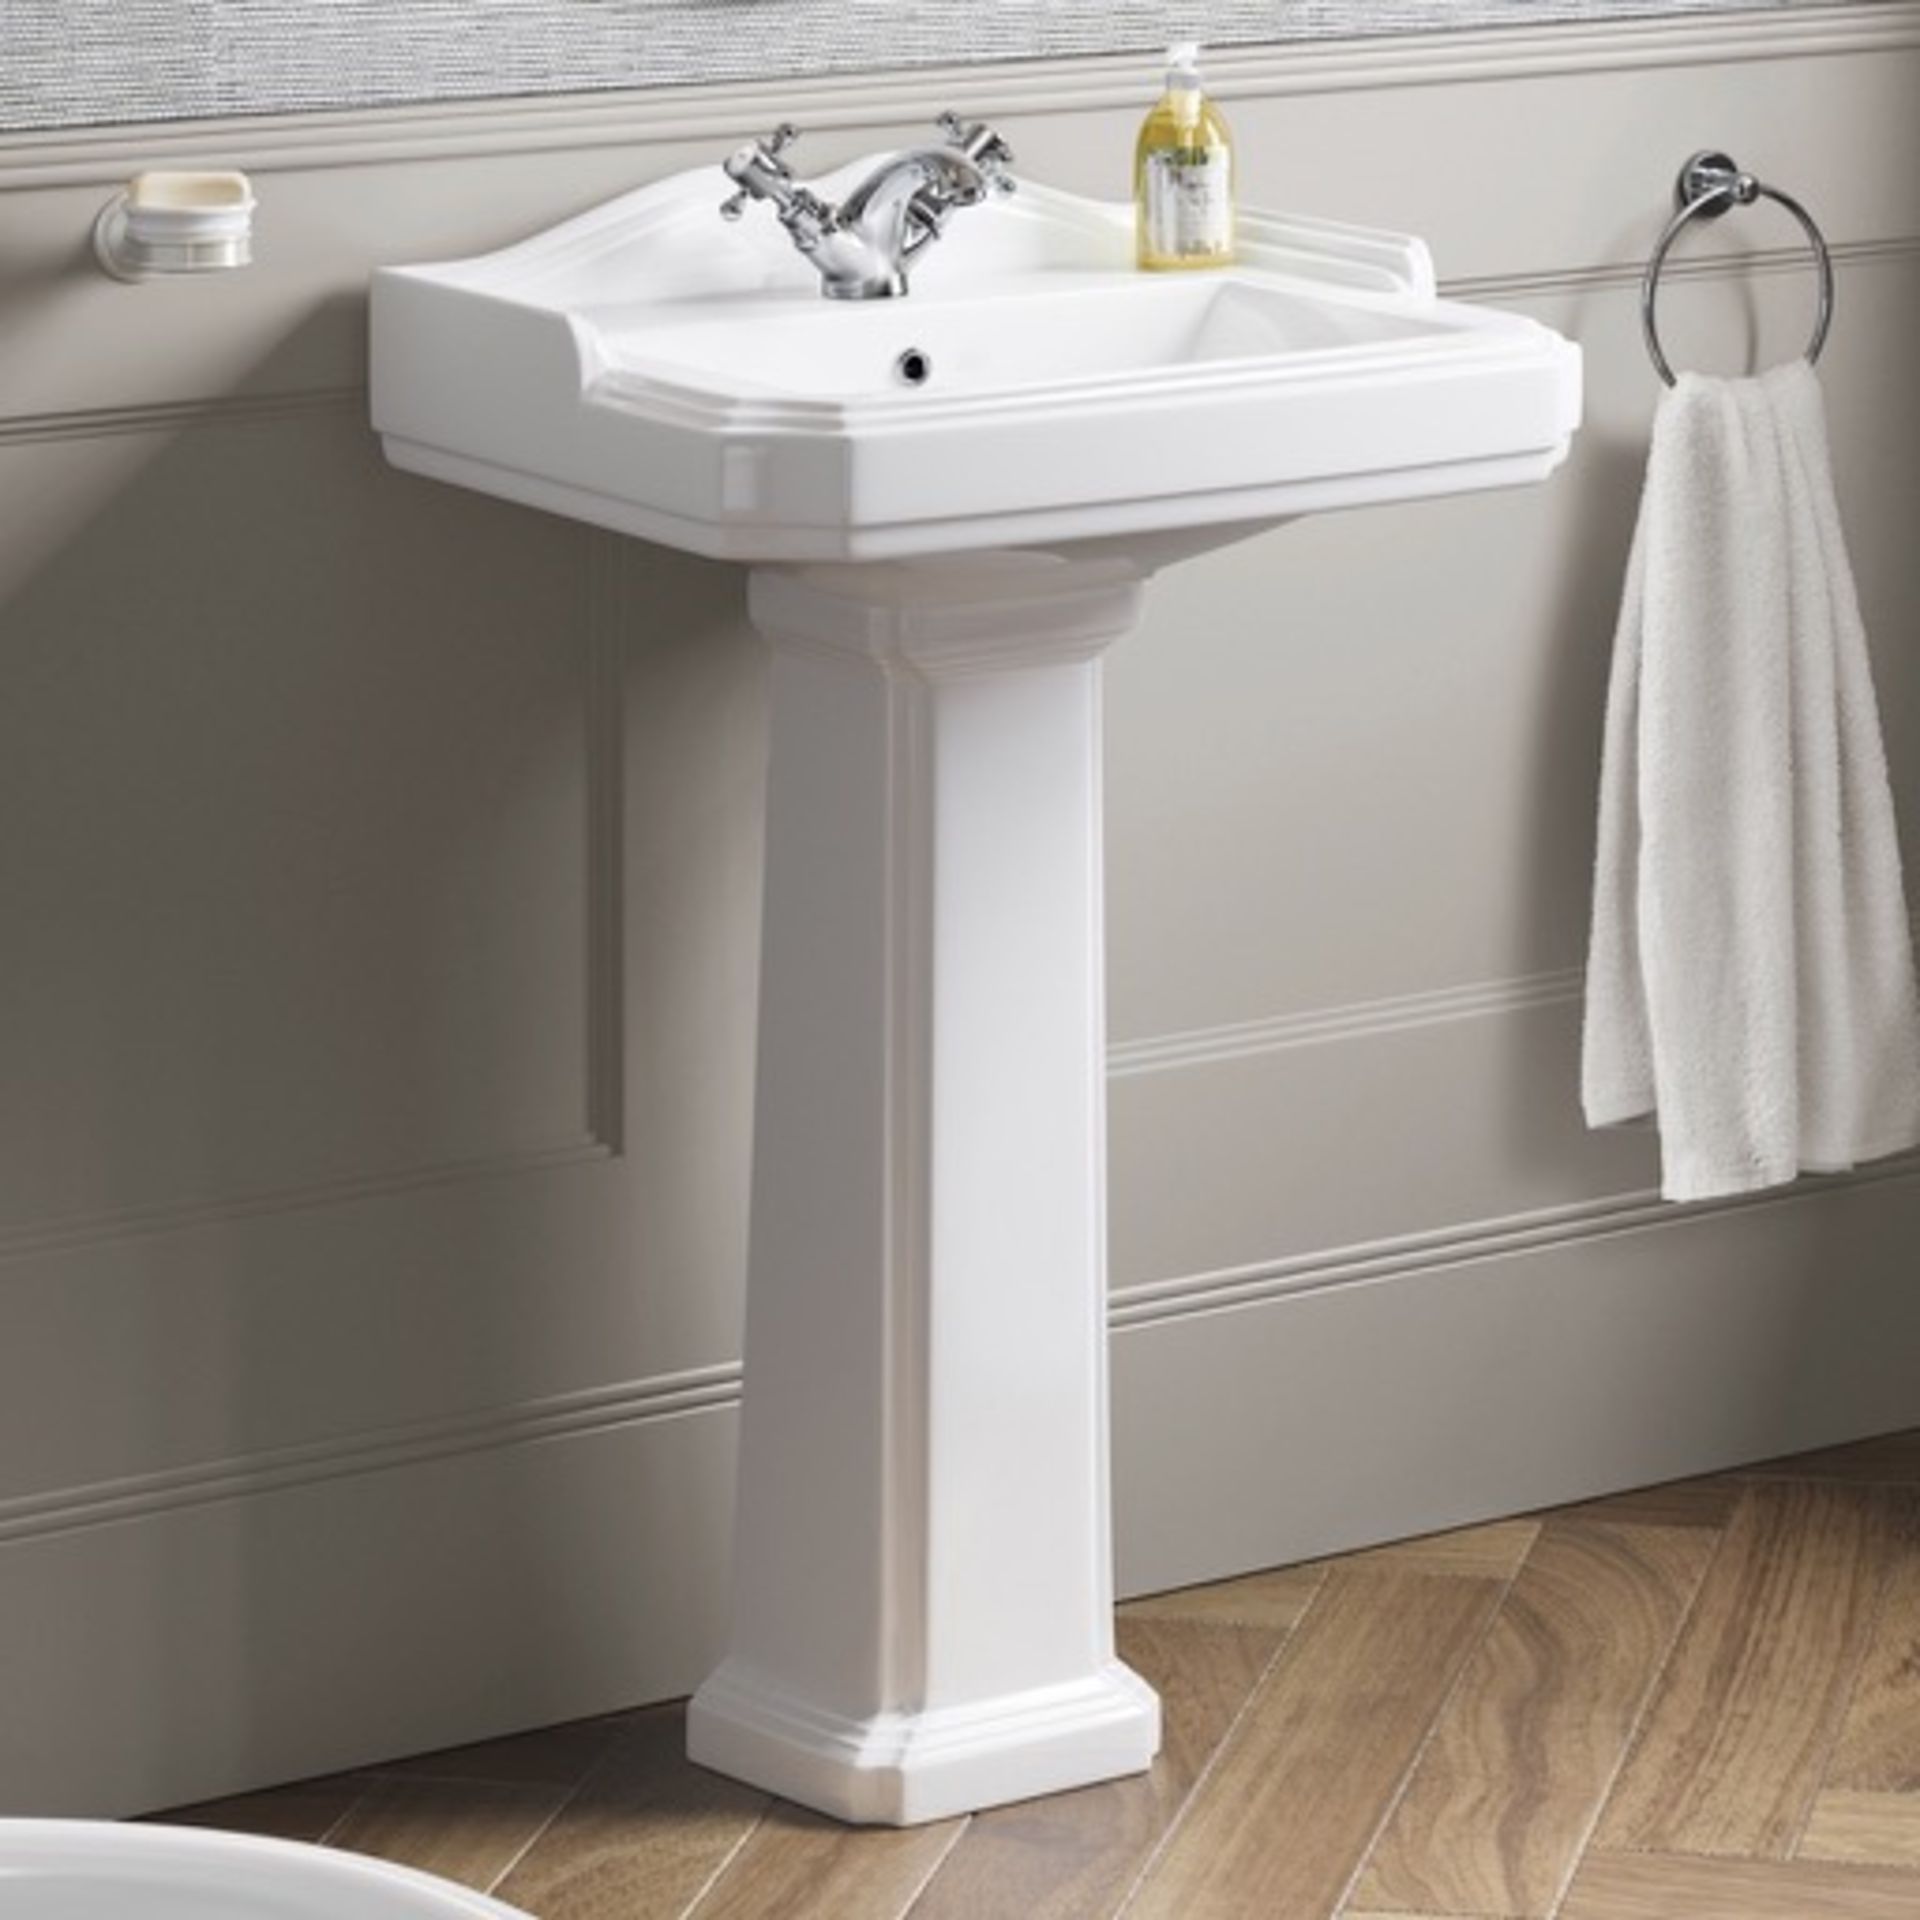 PALLET TO CONTAIN 8 x Victoria Basin & Pedestal - Single Tap Hole. RRP £175.99, TOTAL RRP £1,407.92.